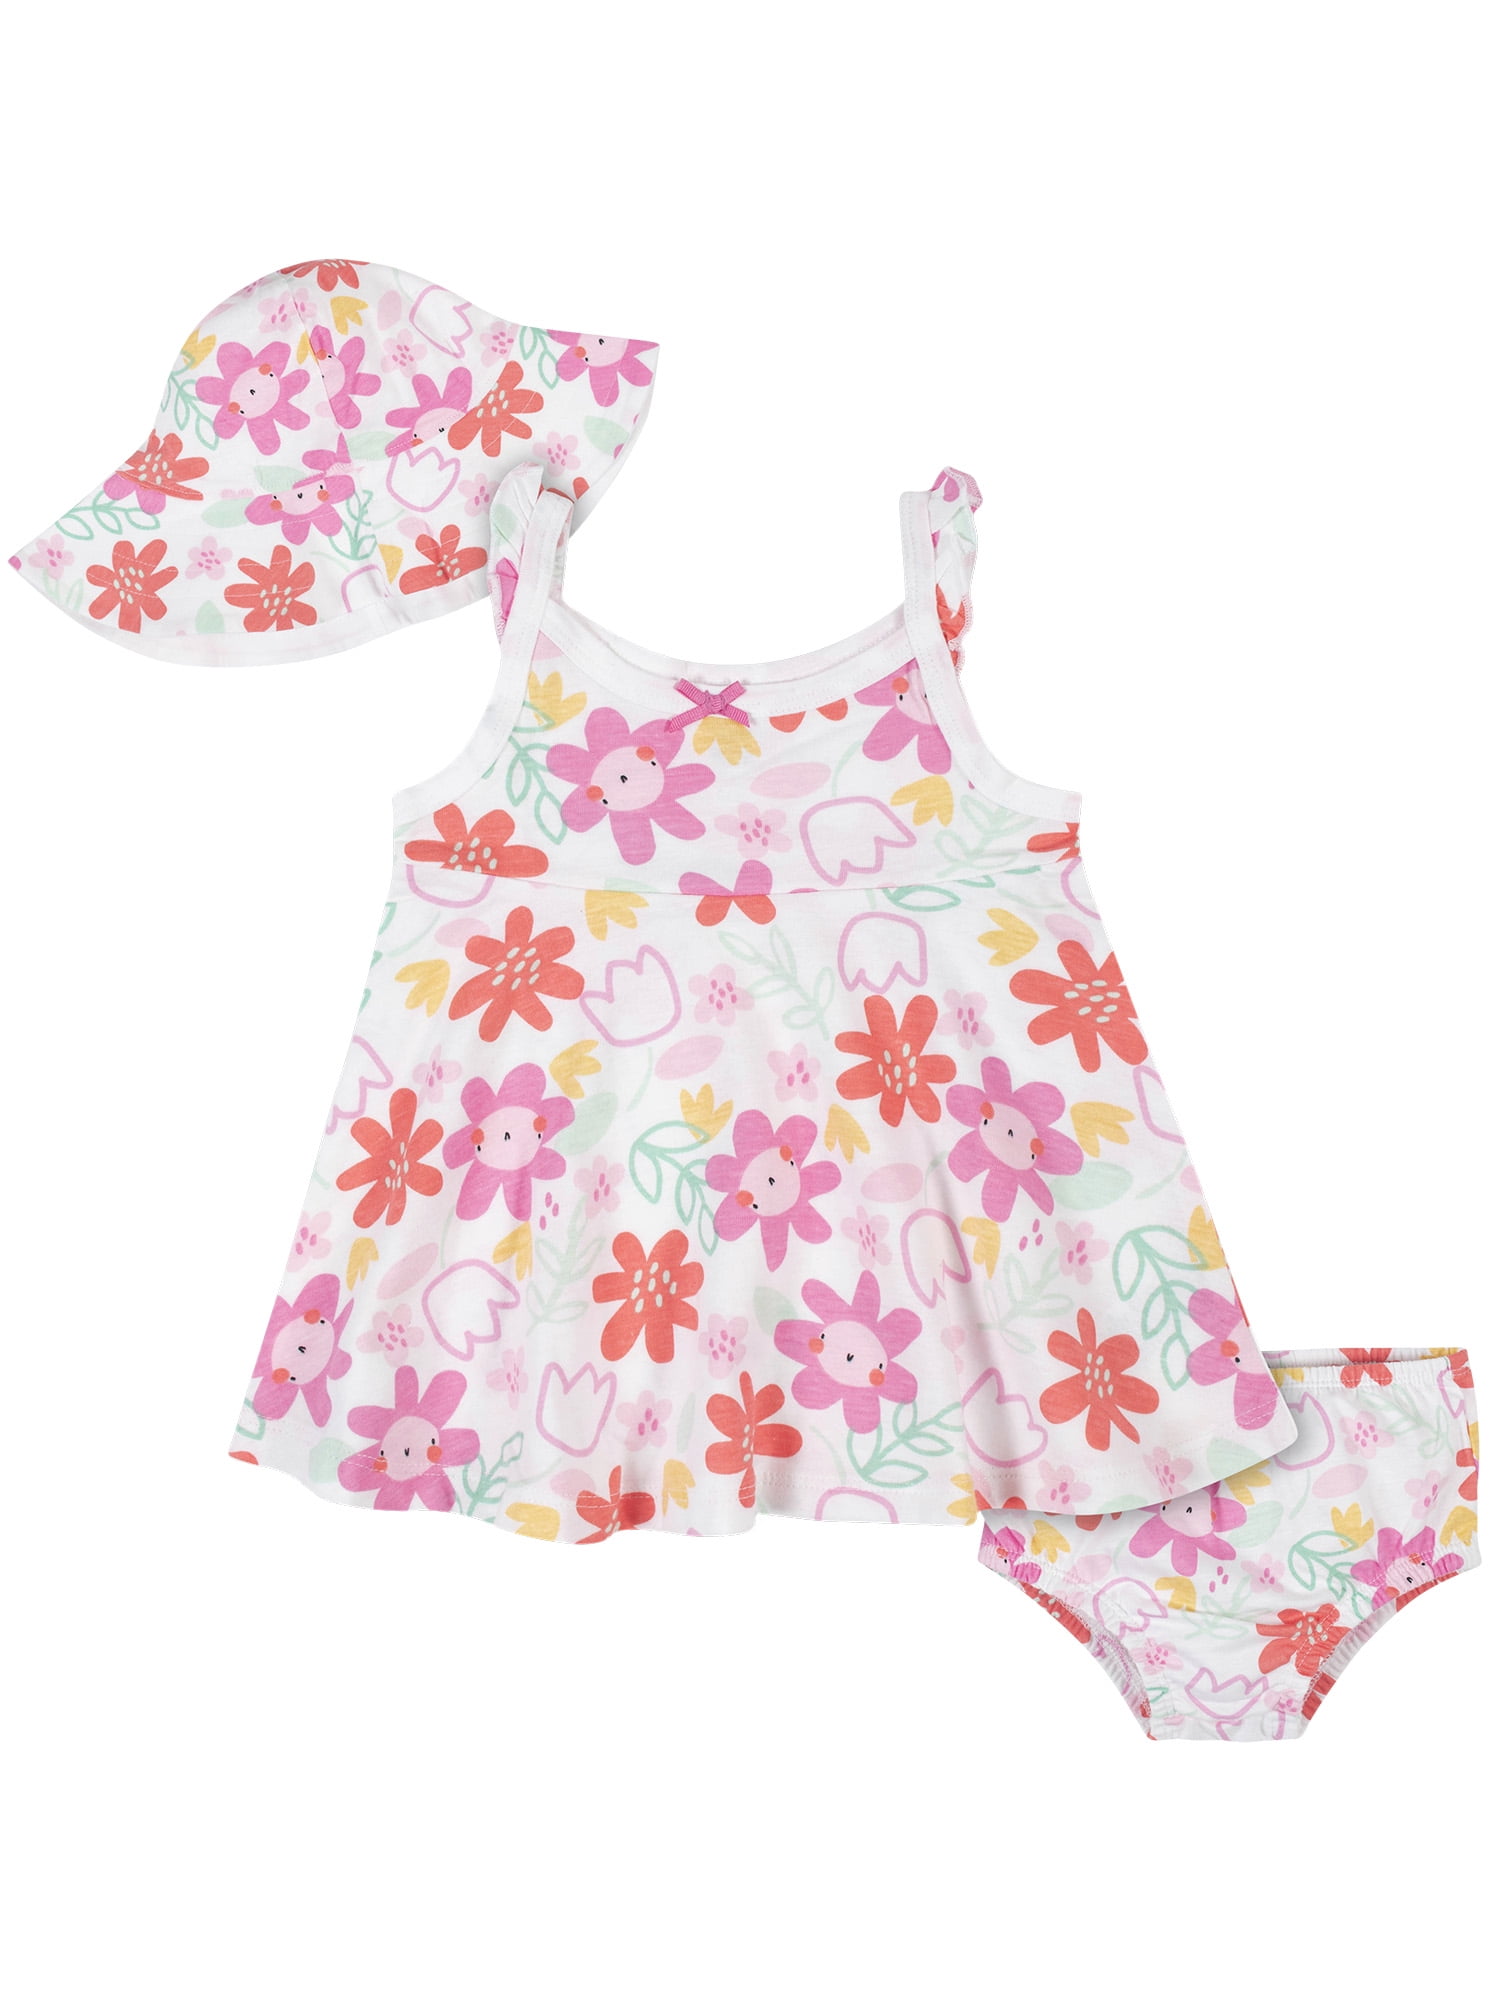 Newborn Baby Girls Summer Outfit Set Floral Print Bow Pink Princess Dress and Bloomer Diaper Cover Striped Short Pants 